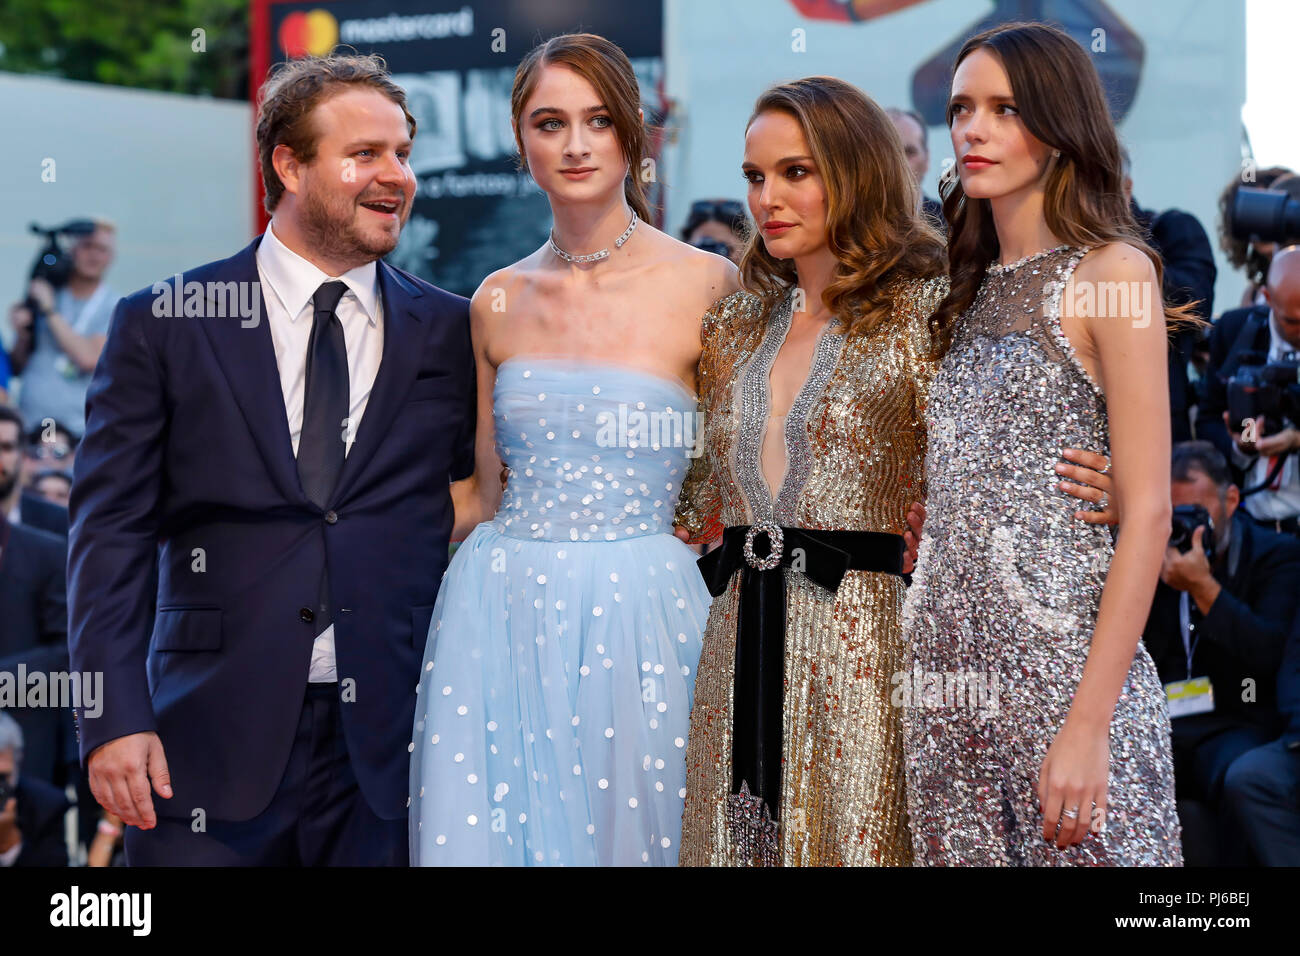 Venice, Italy. 04th Sep, 2018. Brady Corbet, Raffey Cassidy, Natalie Portman, Stacy Martin attend the 'Vox Lux' premiere during the 75th Venice Film Festival at the Palazzo del Cinema on September 04, 2018 in Venice, Italy. Credit: John Rasimus/Media Punch ***France, Sweden, Norway, Denark, Finland, Usa, Czech Republic, South America Only***/Alamy Live News Stock Photo